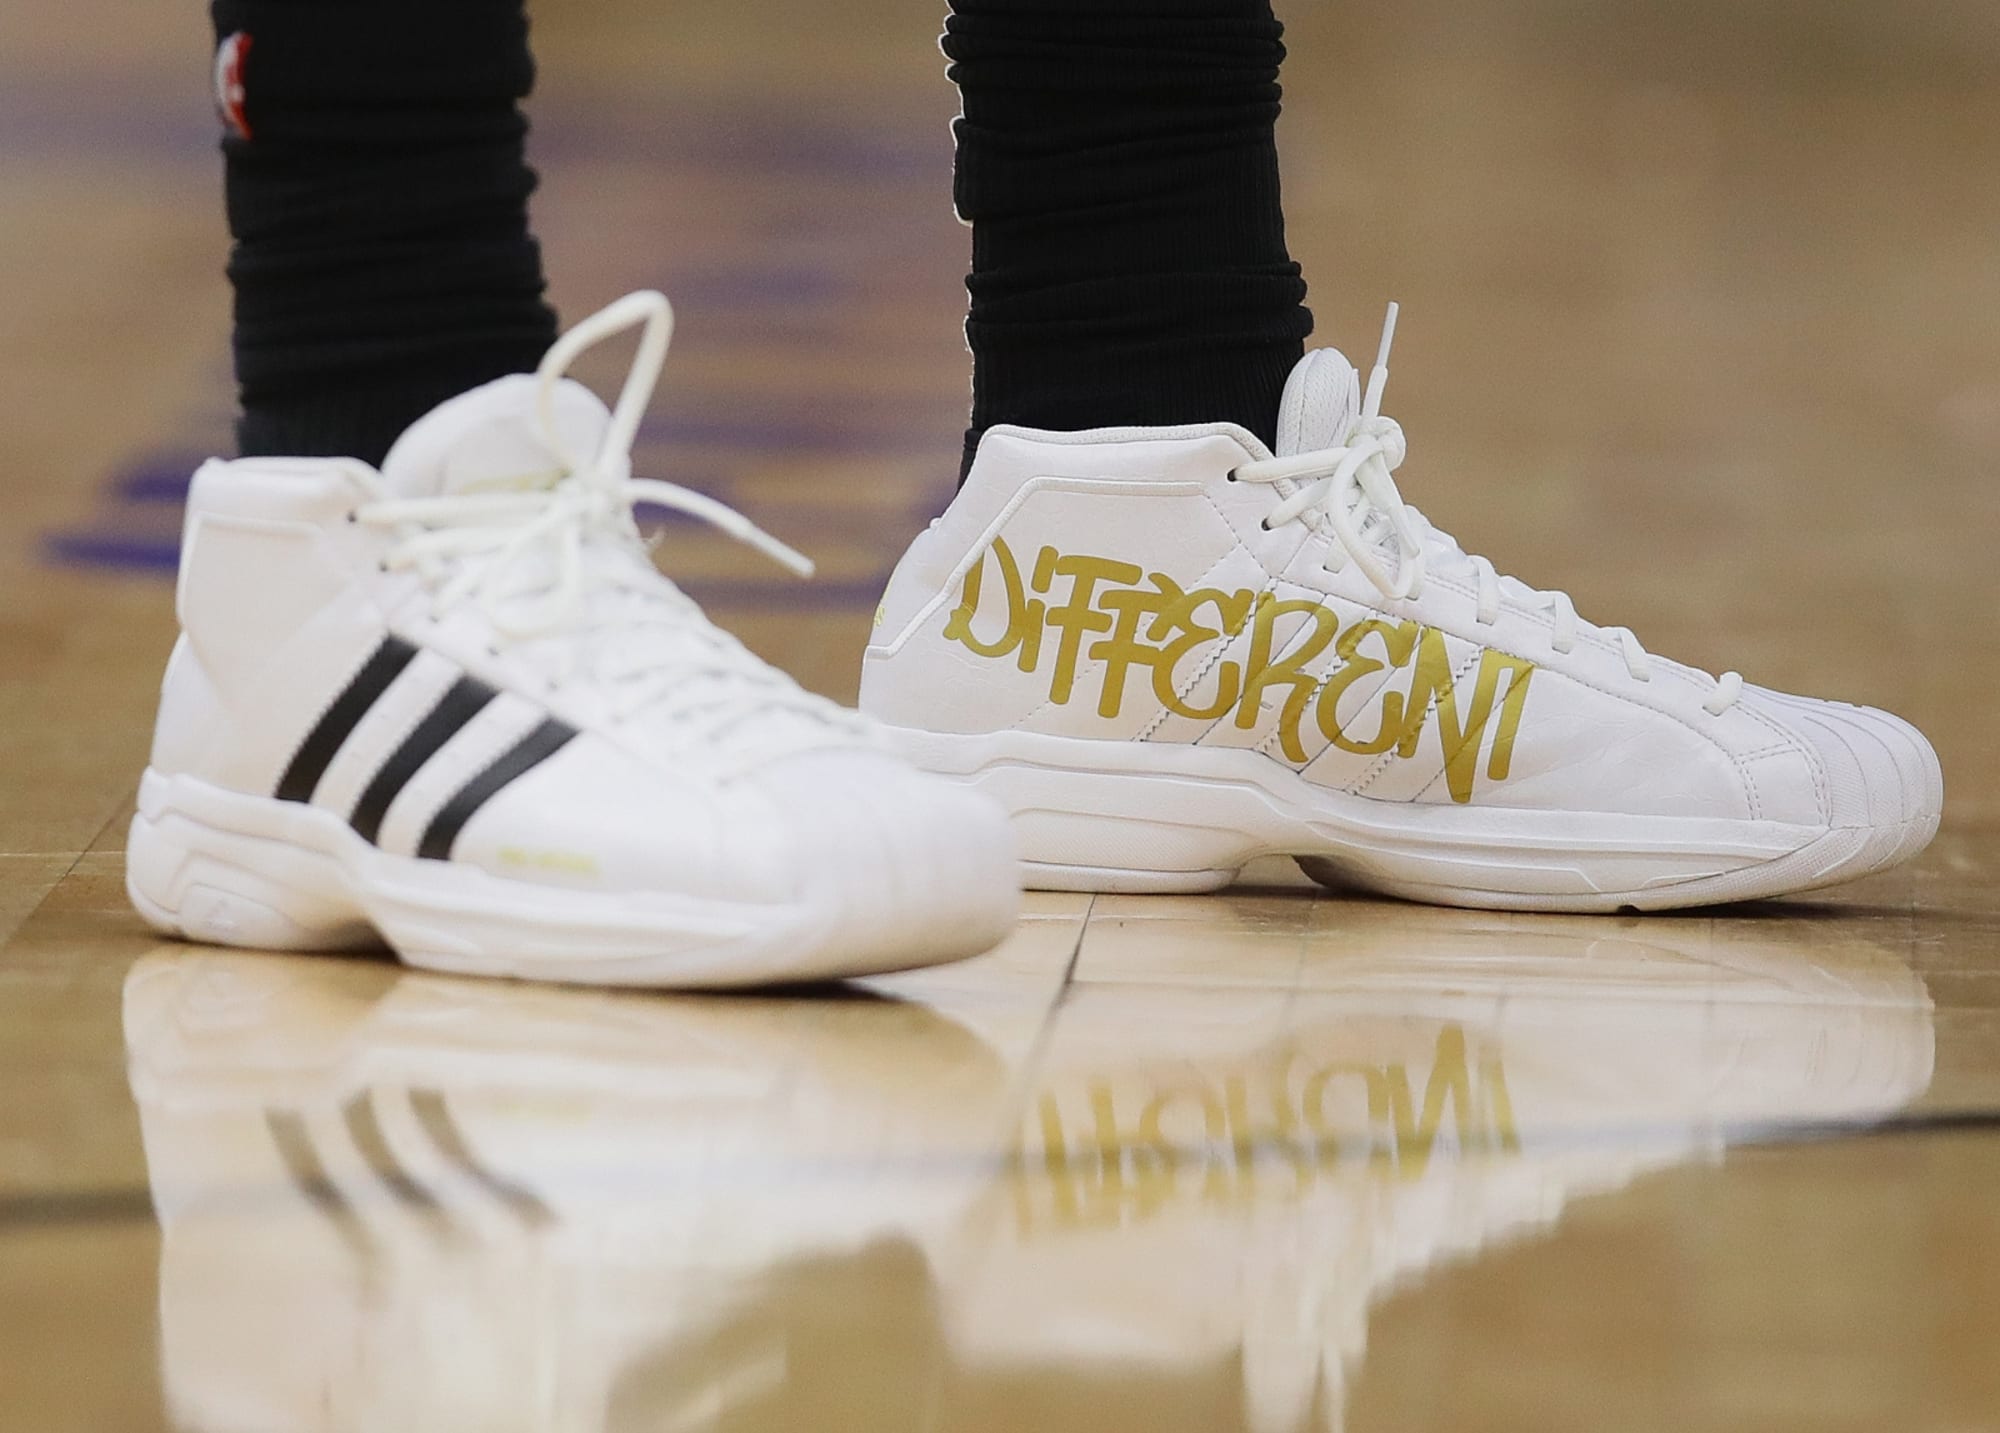 A detail view of the shoes worn by Chicago Bulls guard Zach LaVine